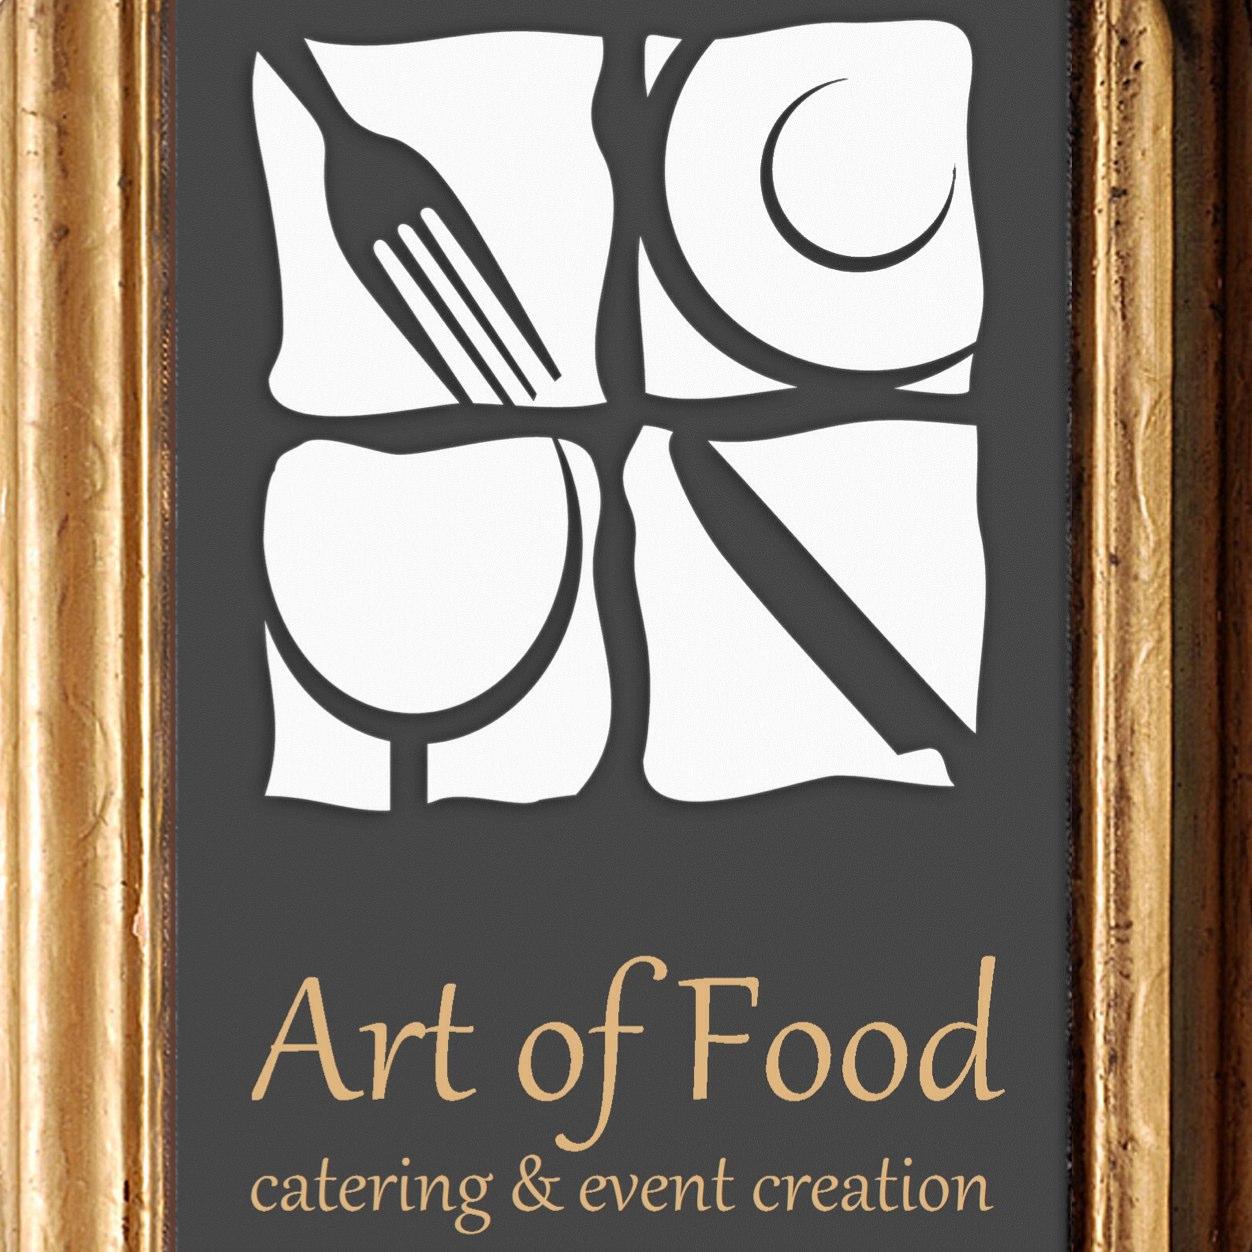 Providing the highest level of Culinary and Catering services for both corporate and social events!